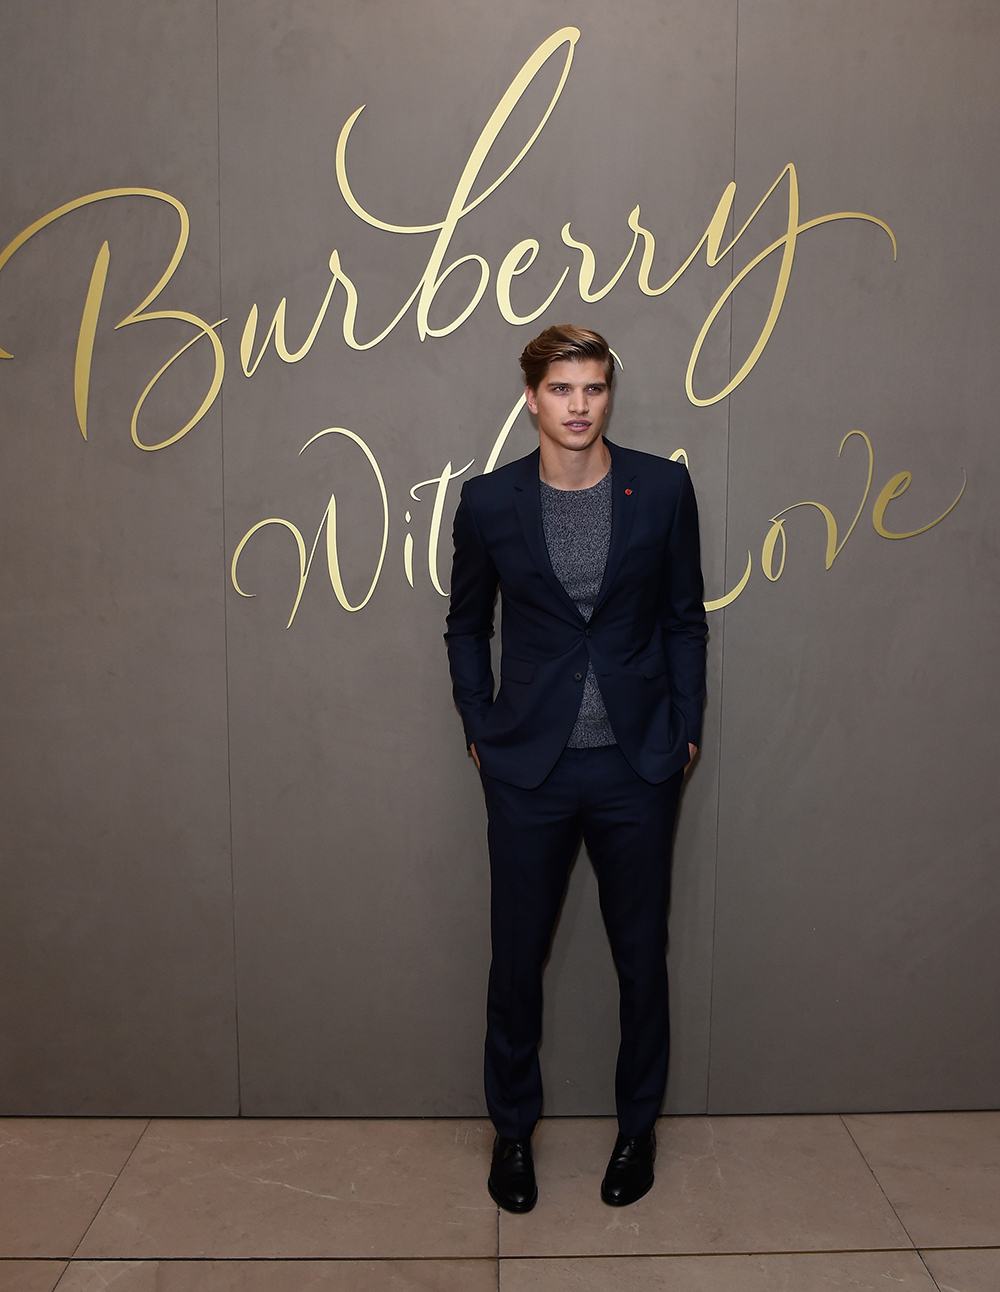 Toby Huntington-Whiteley at the Burberry festive film premiere.